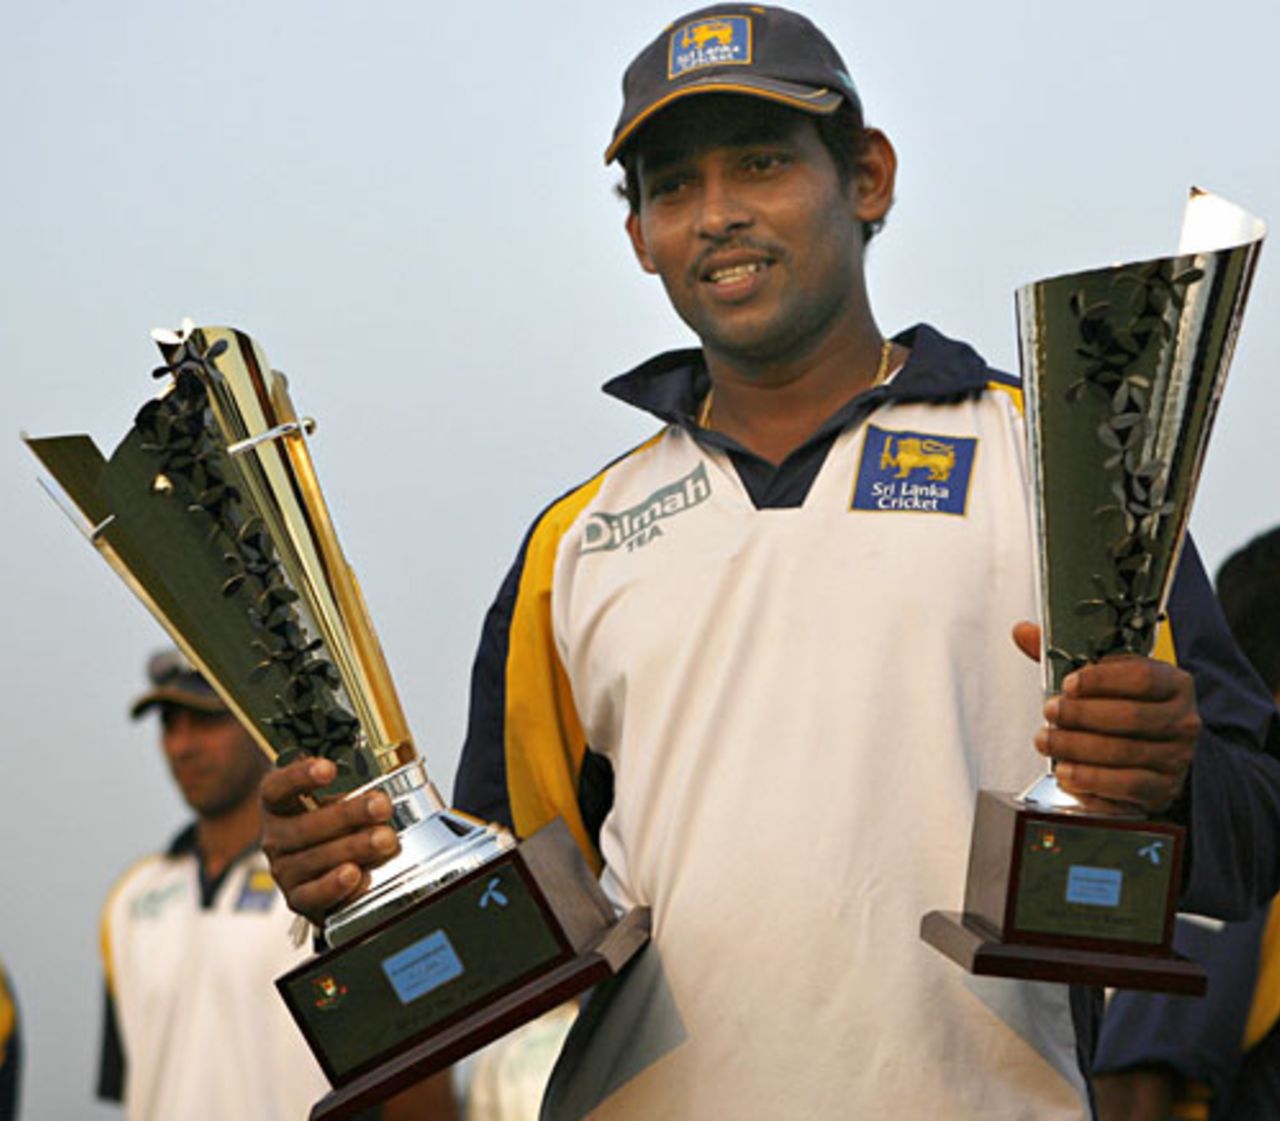 Tillakaratne Dilshan with the Man-of-the-Match and Man-of-the-Series awards, Bangladesh v Sri Lanka, 2nd Test, Chittagong, 4th day, January 6, 2008